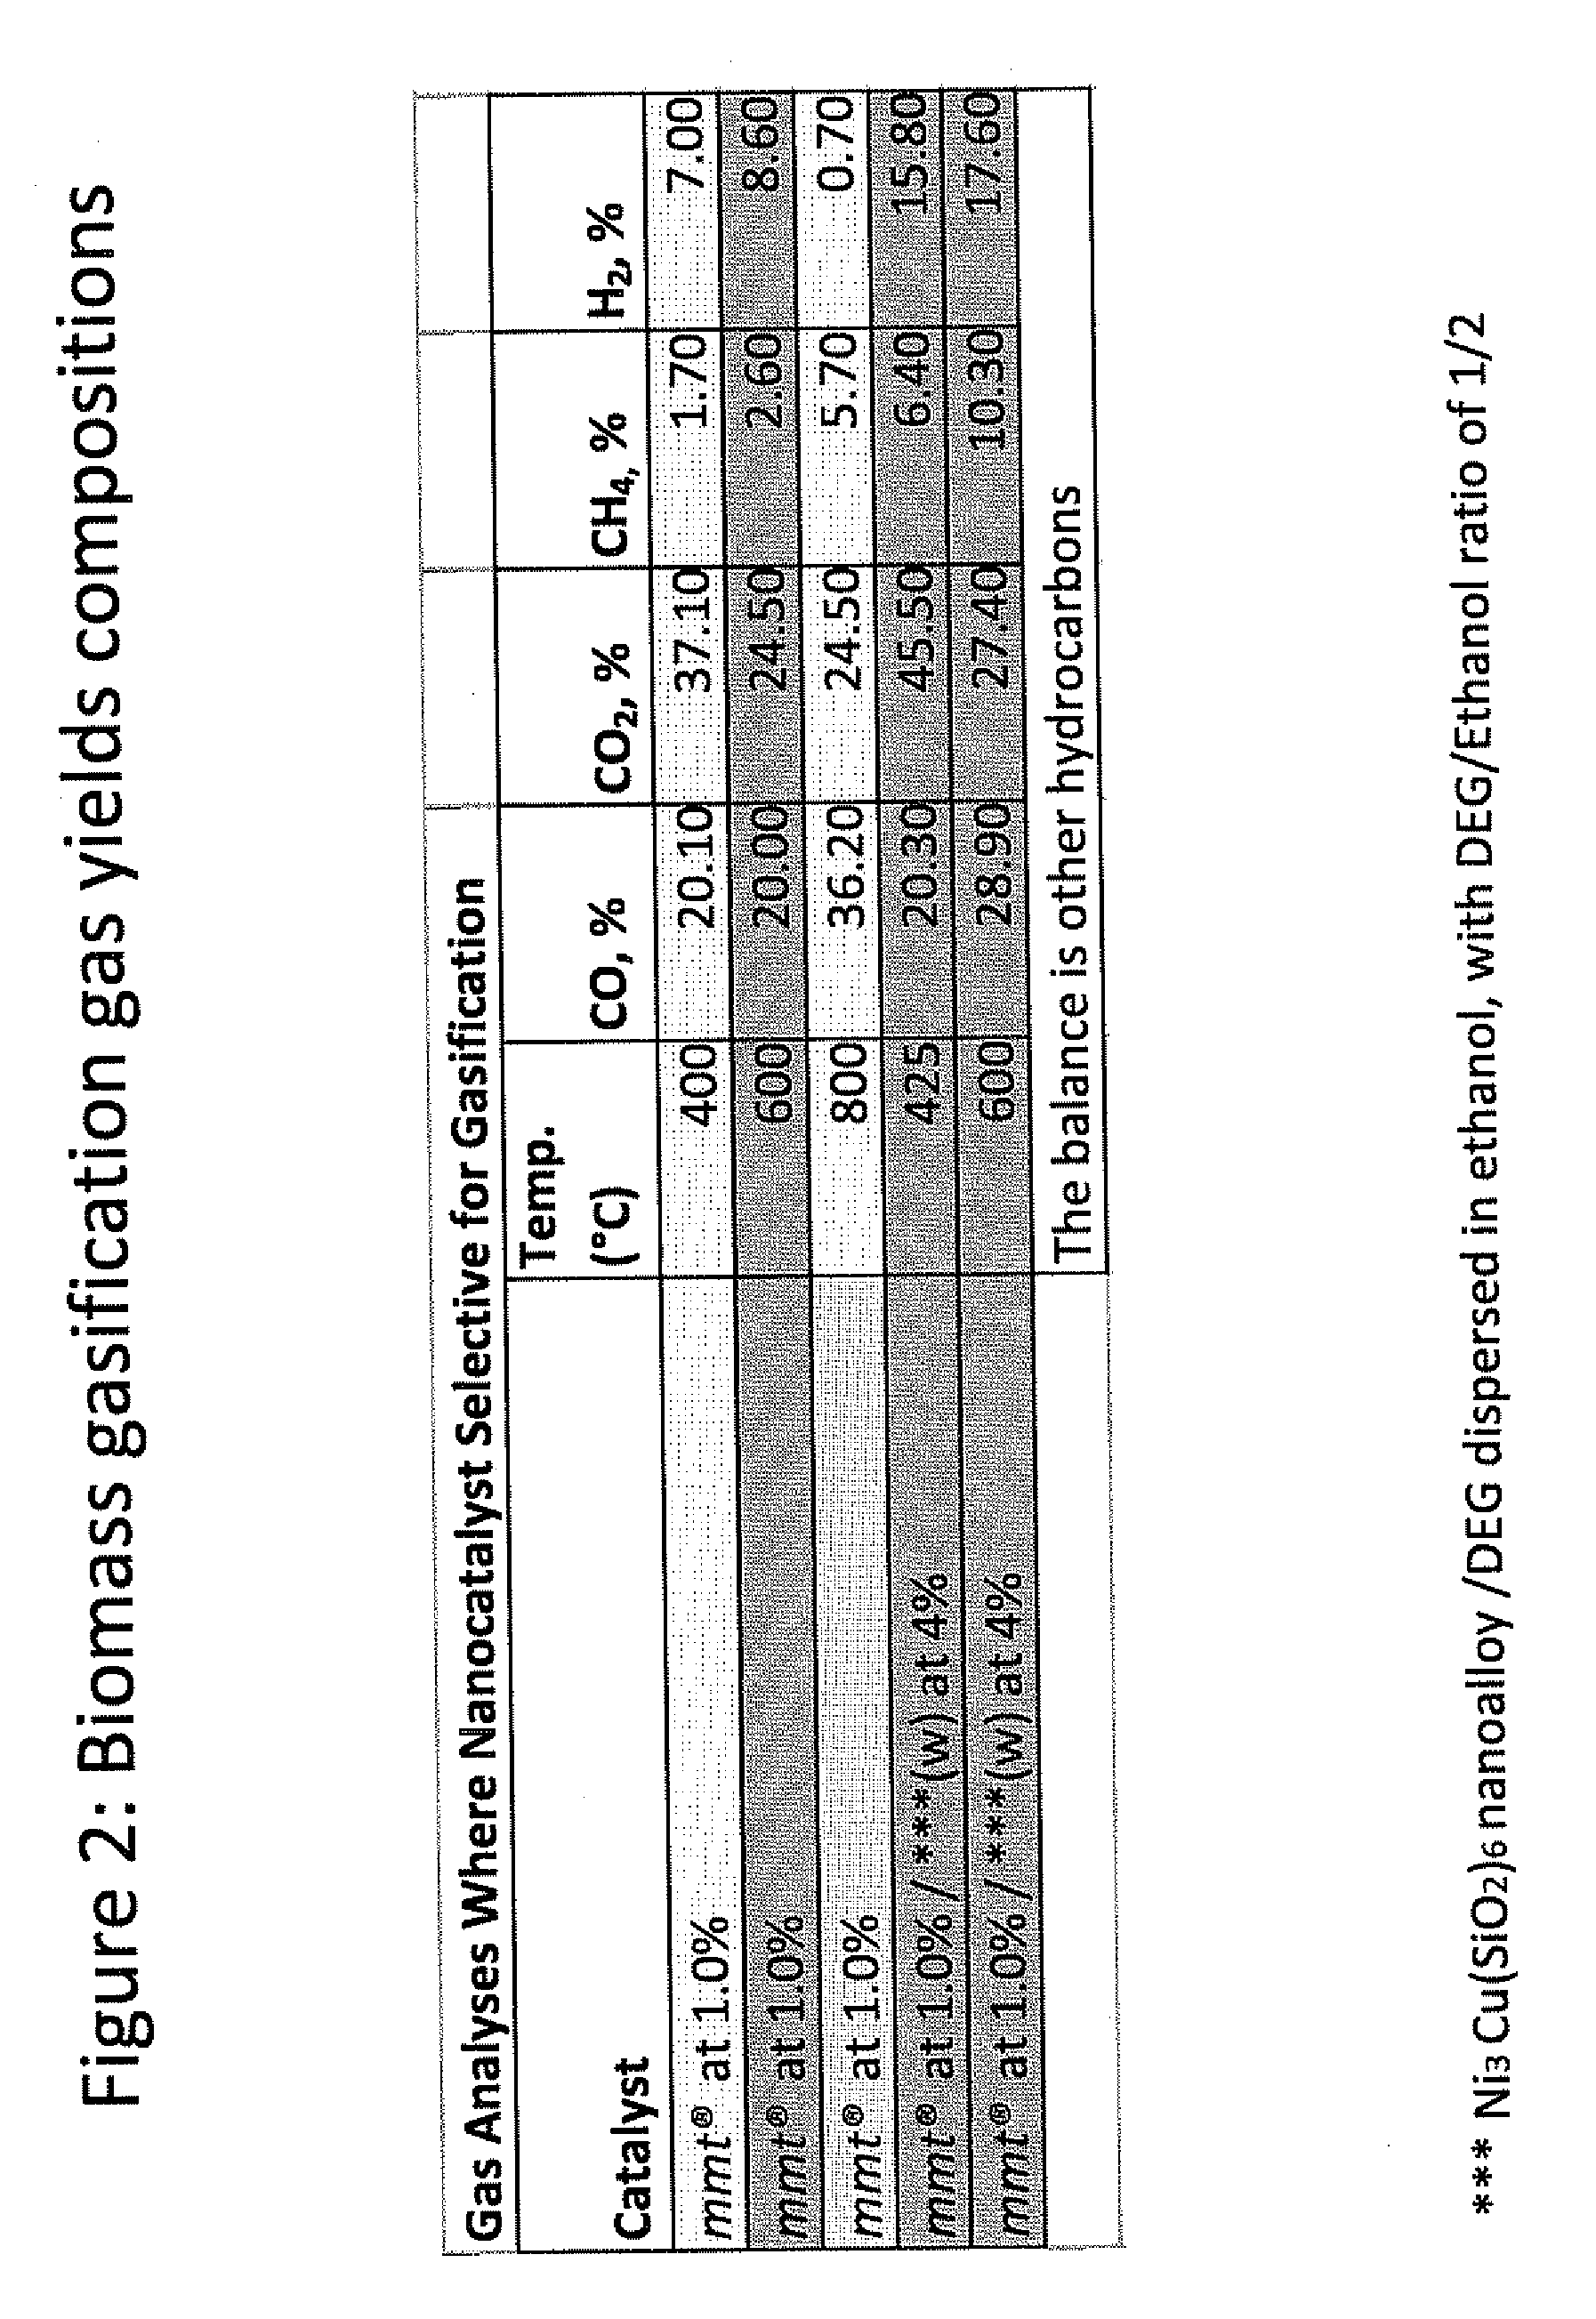 Nanoparticle Catalyst Compounds and/or Volatile Organometallic Compounds and Method of Using the Same for Biomass Gasification